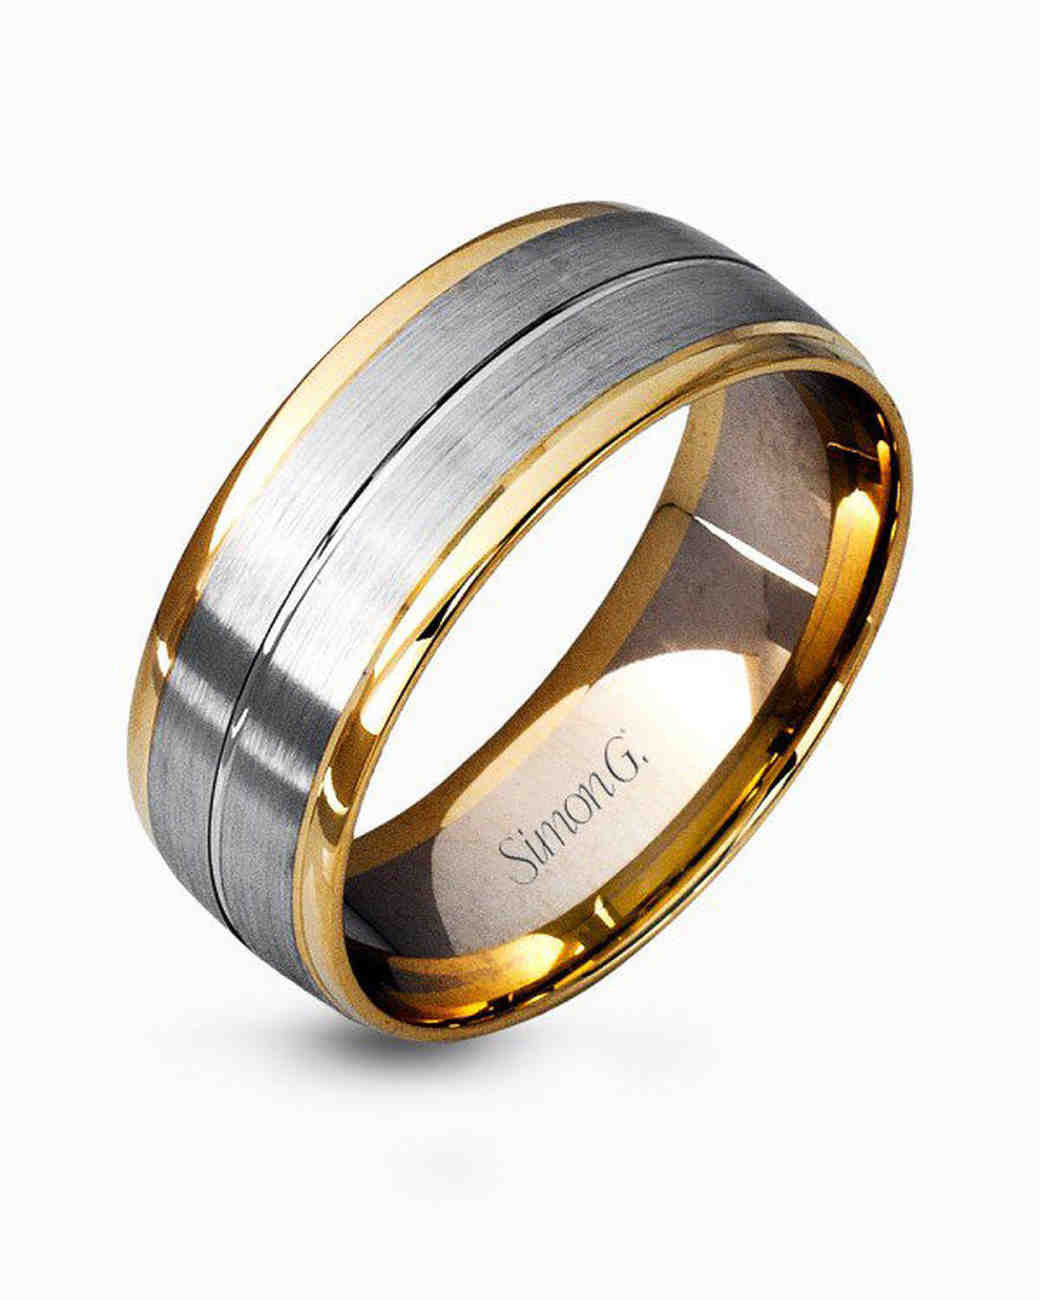 Groom Wedding Bands
 30 Classic Wedding Bands for the Groom